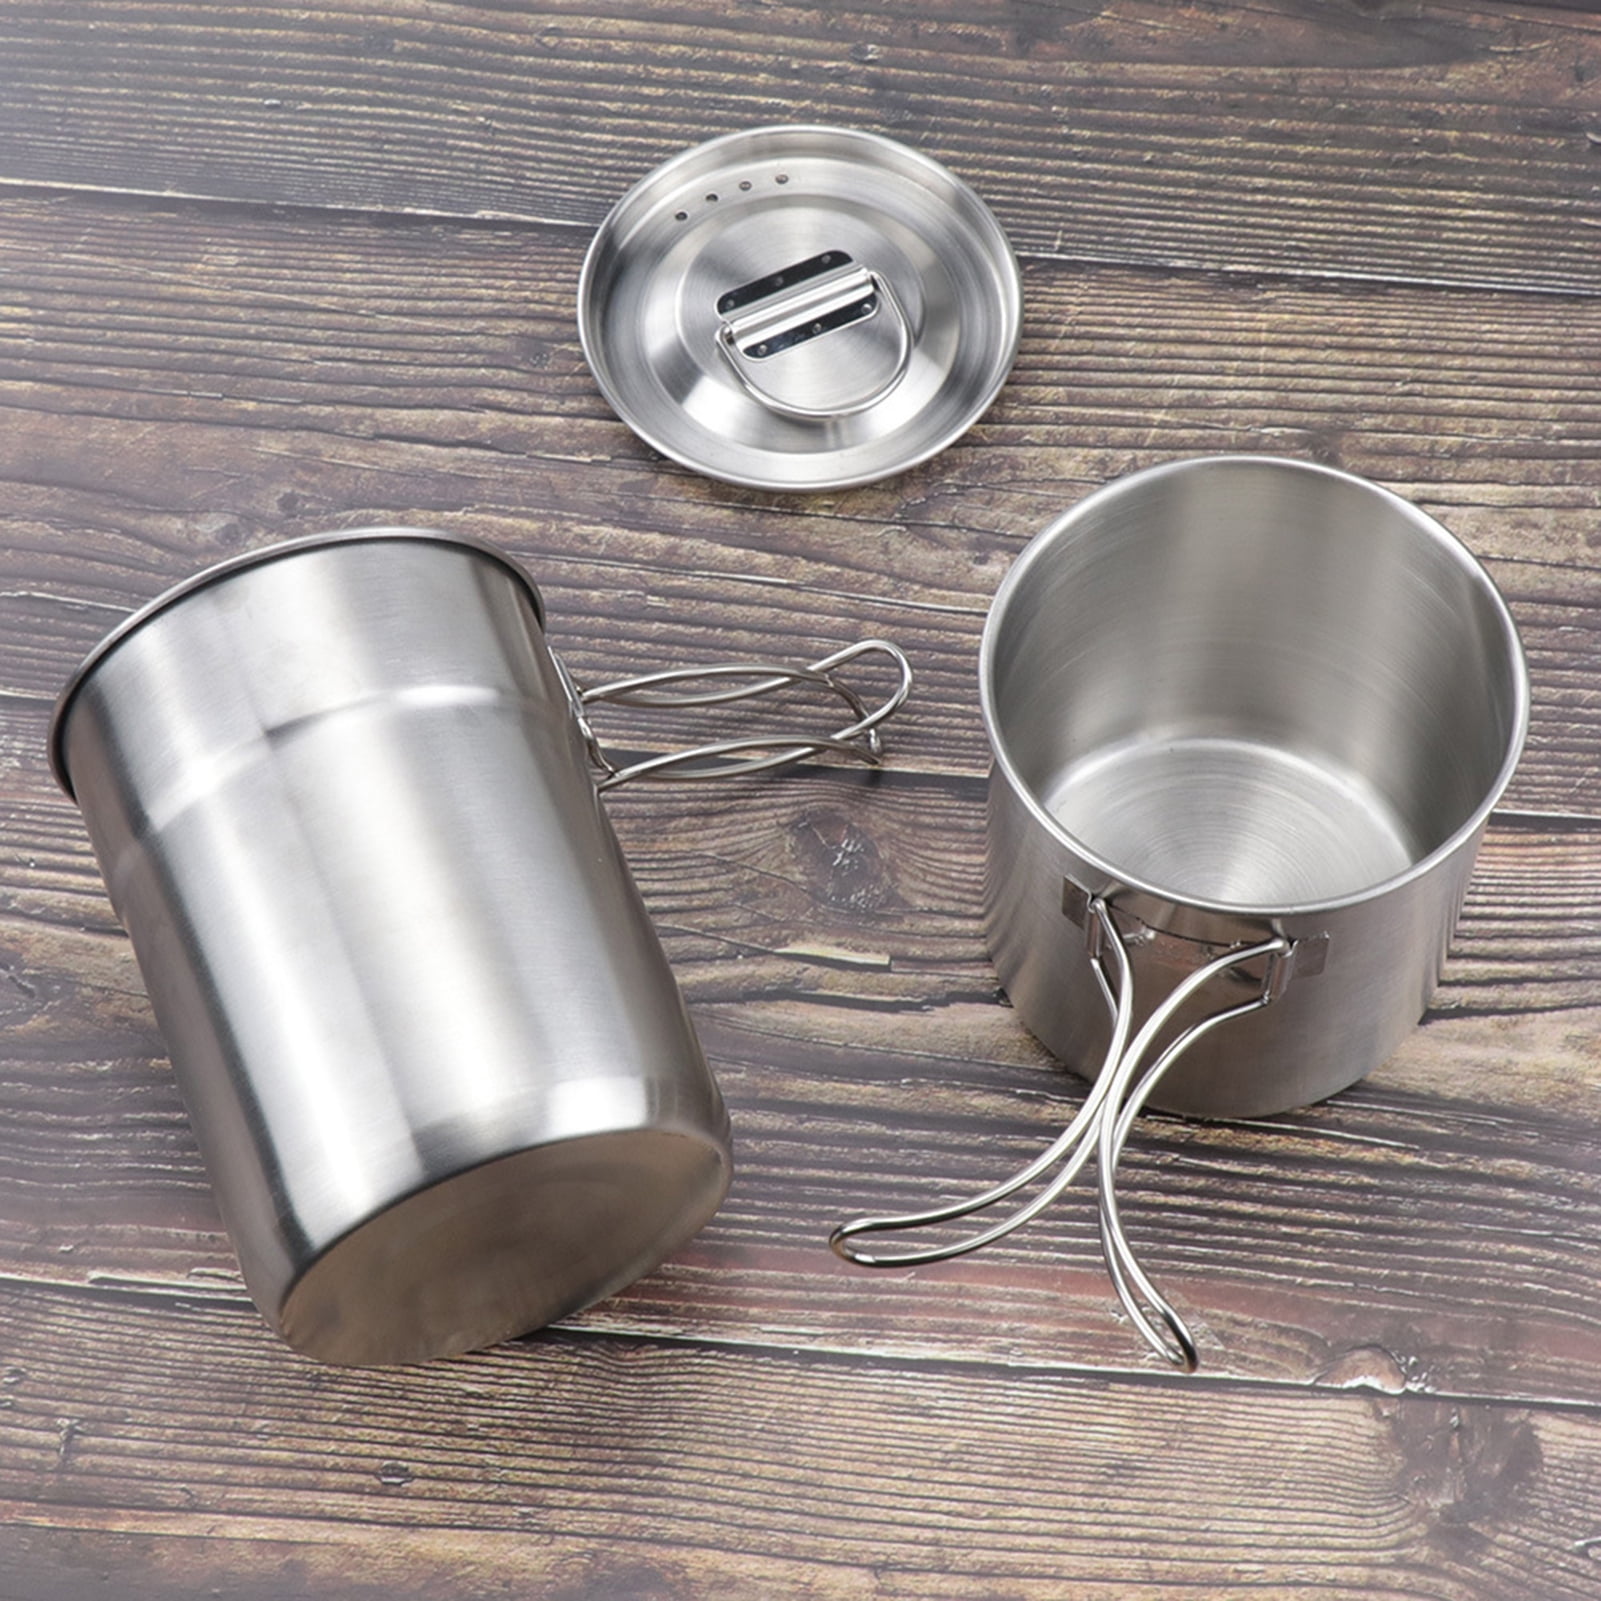 Travel Camp Outdoors Survival Stainless Steel Soup bowl Mug Cup 550 ML 18.59 OZ 